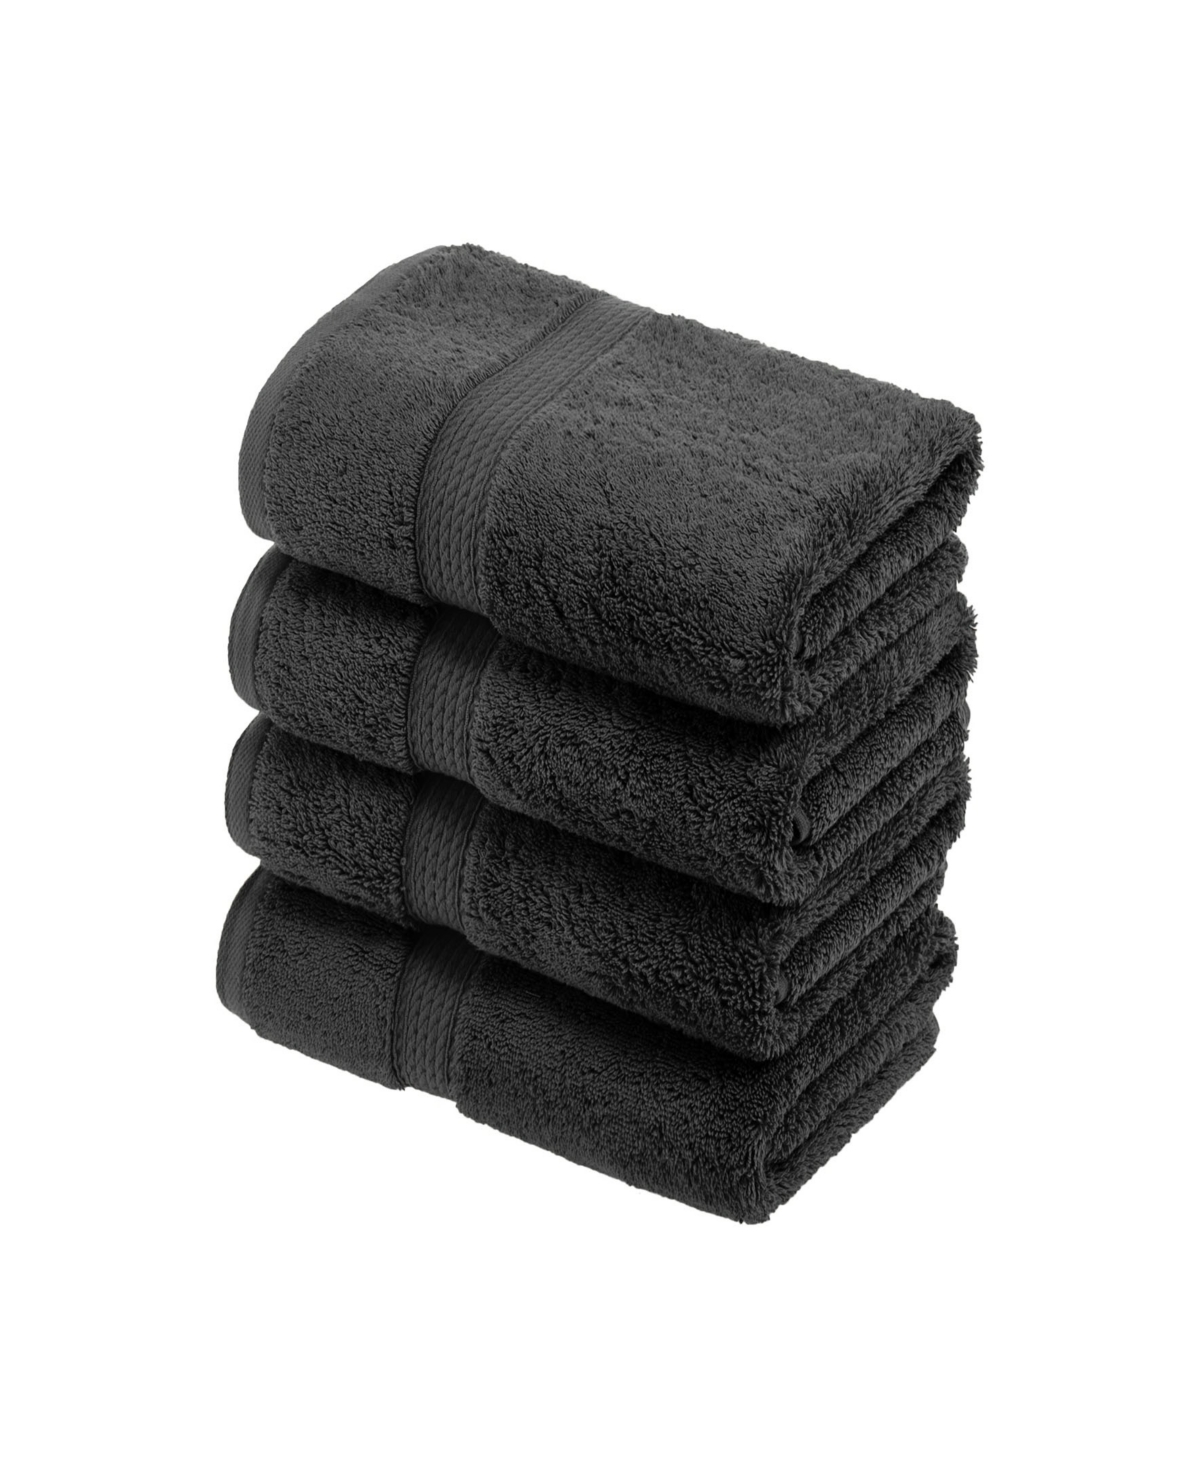 Superior Highly Absorbent 4 Piece Egyptian Cotton Ultra Plush Solid Hand Towel Set Bedding In Charcoal